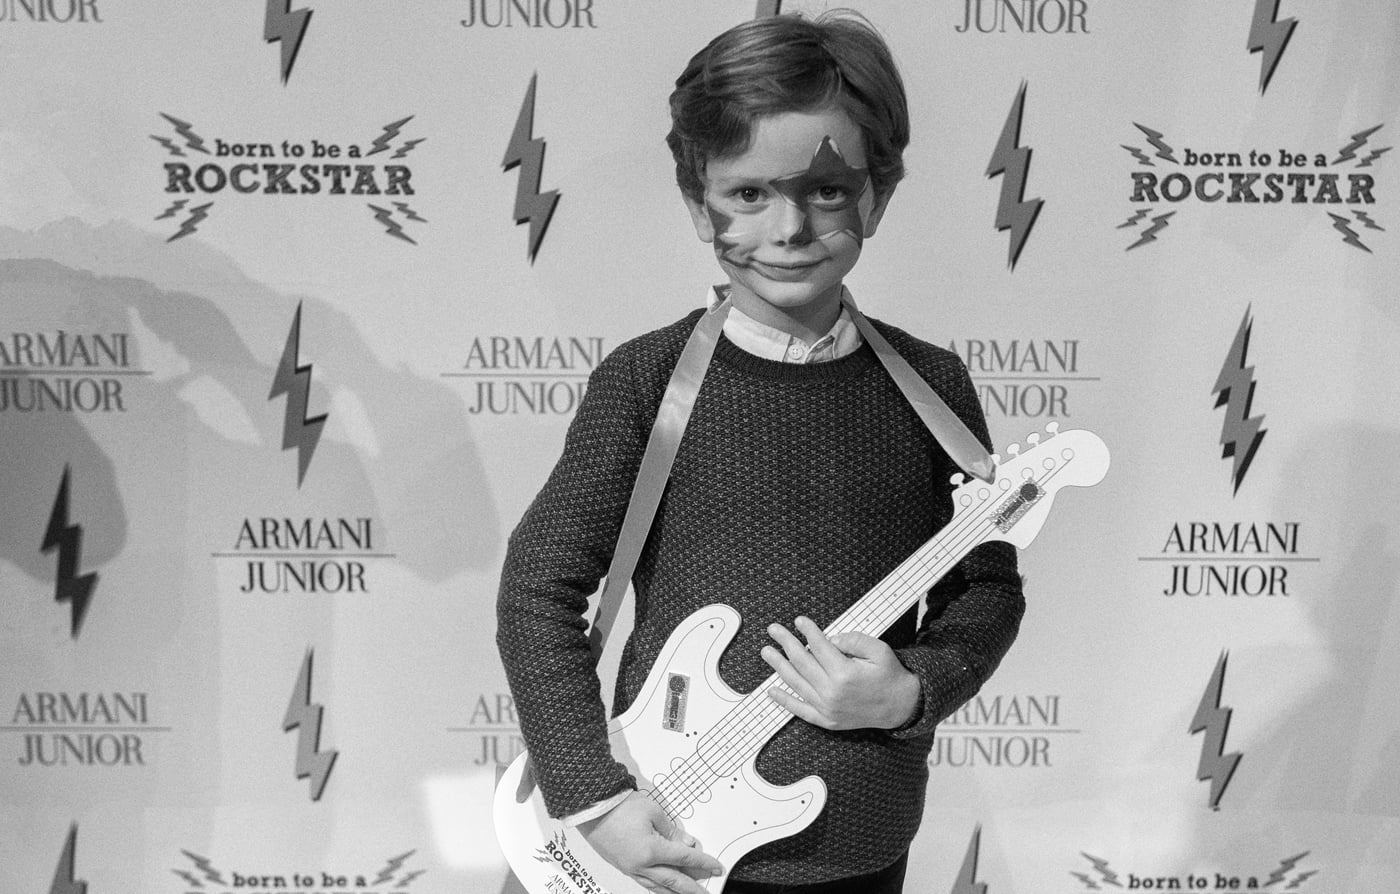 Looking back at the festive faces of Born to be a Rockstar - the Armani Junior Event held at the Emporio Armani Flagship Store in Milan.
Behind the scenes. Riccardo Polcaro, fotografo moda bambino.